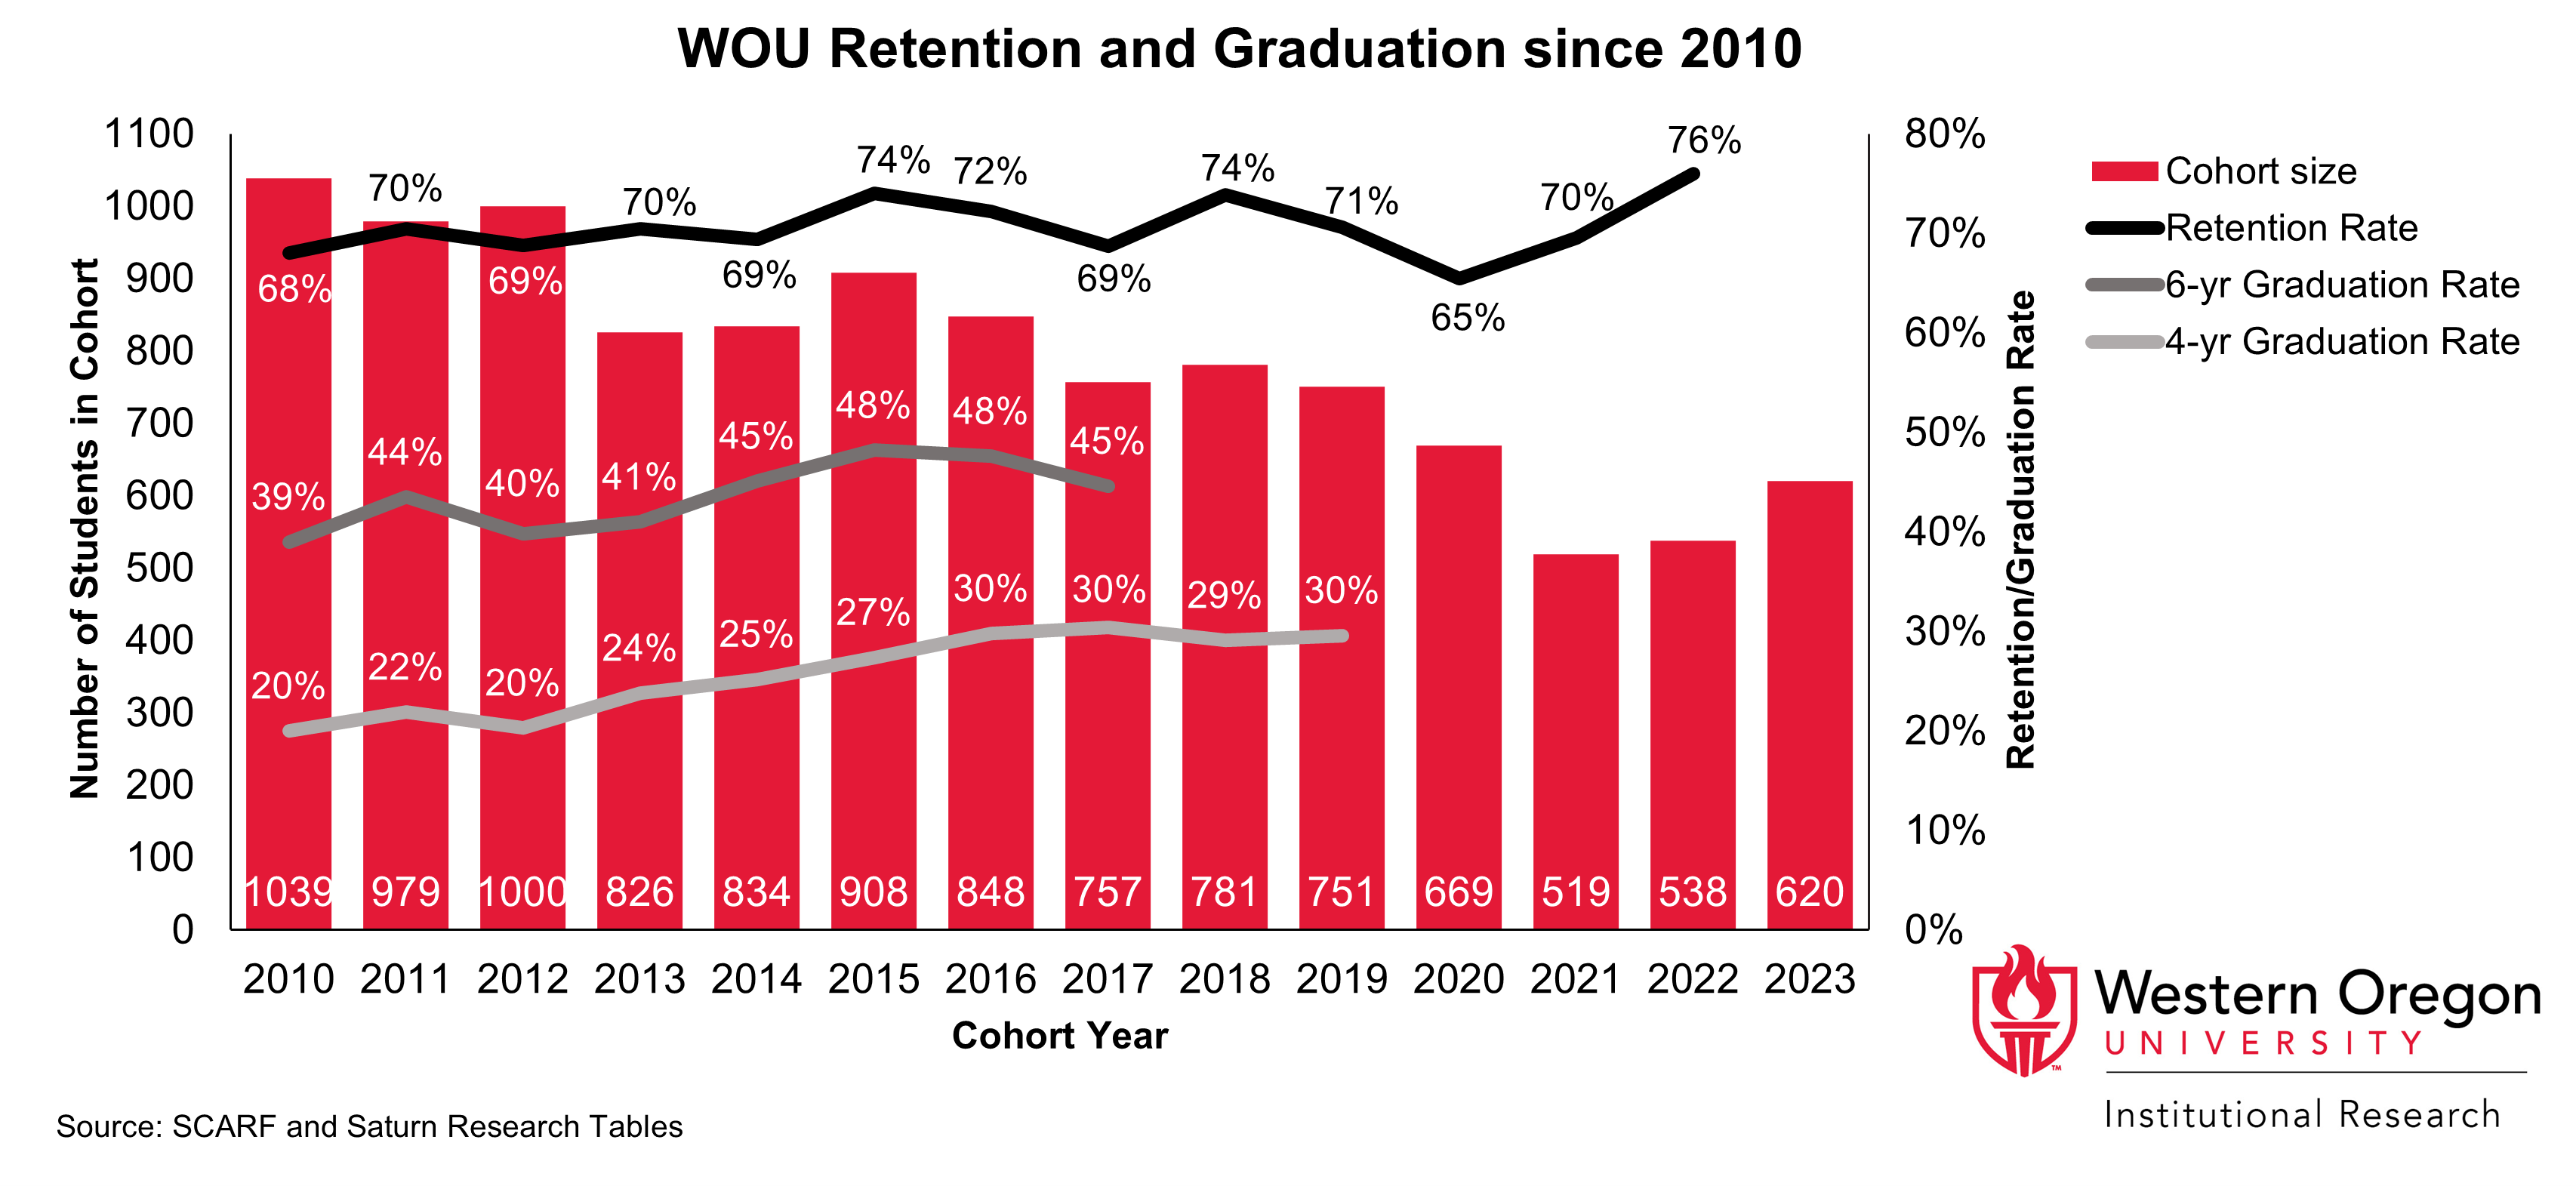 Bar and line graph of retention and 4- and 6-year graduation rates since 2010 for WOU students, showing that graduation and retention rates have increased overall.